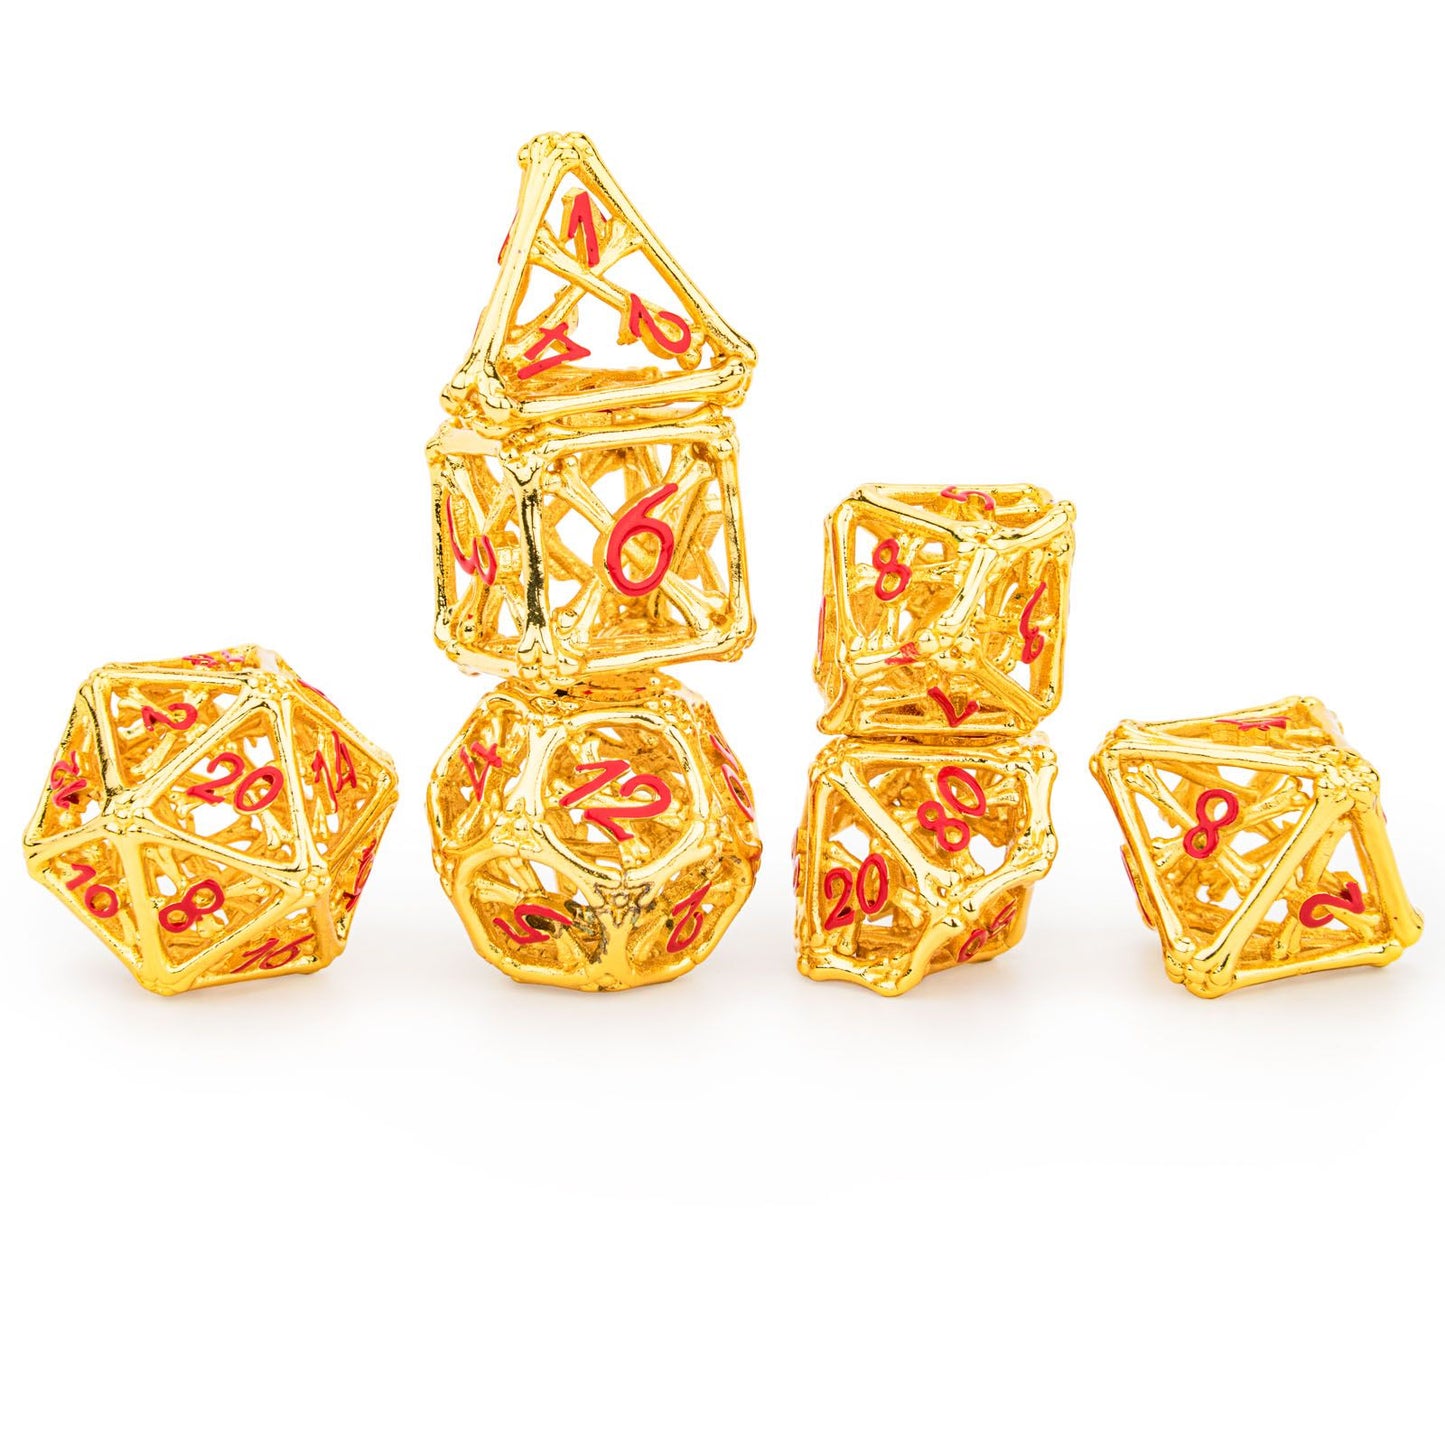 Hollow Death's Treasure Dice set Shiny Gold with Red